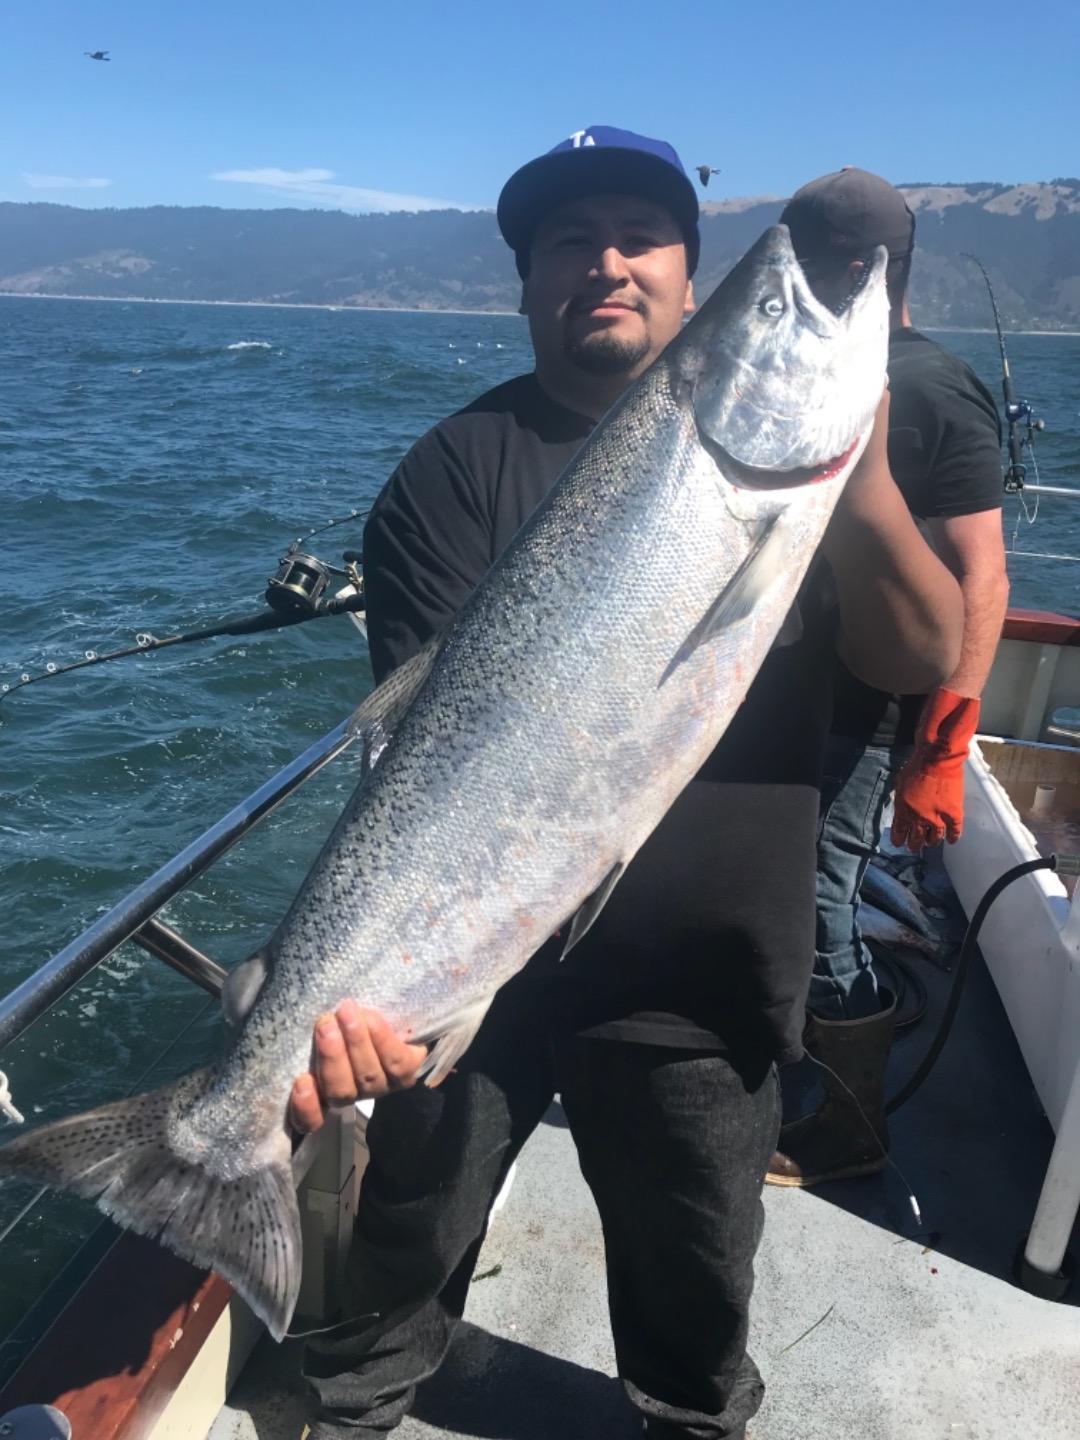 Another great salmon trip!!